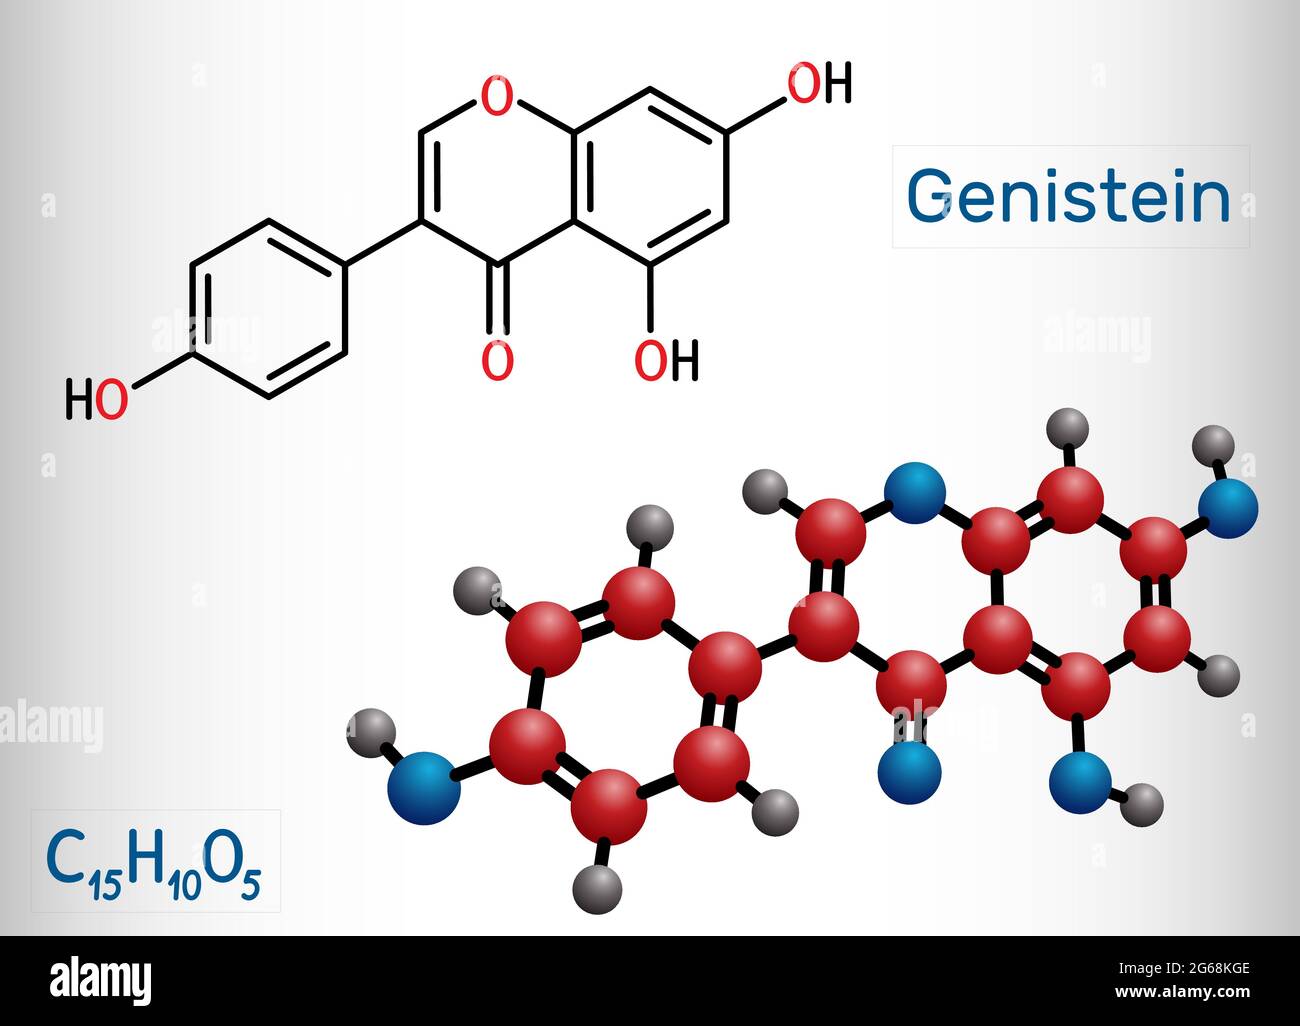 Genistein molecule. It is phytoestrogen, plant metabolite, isoflavone extract from soy with antioxidant and phytoestrogenic properties. Structural che Stock Vector